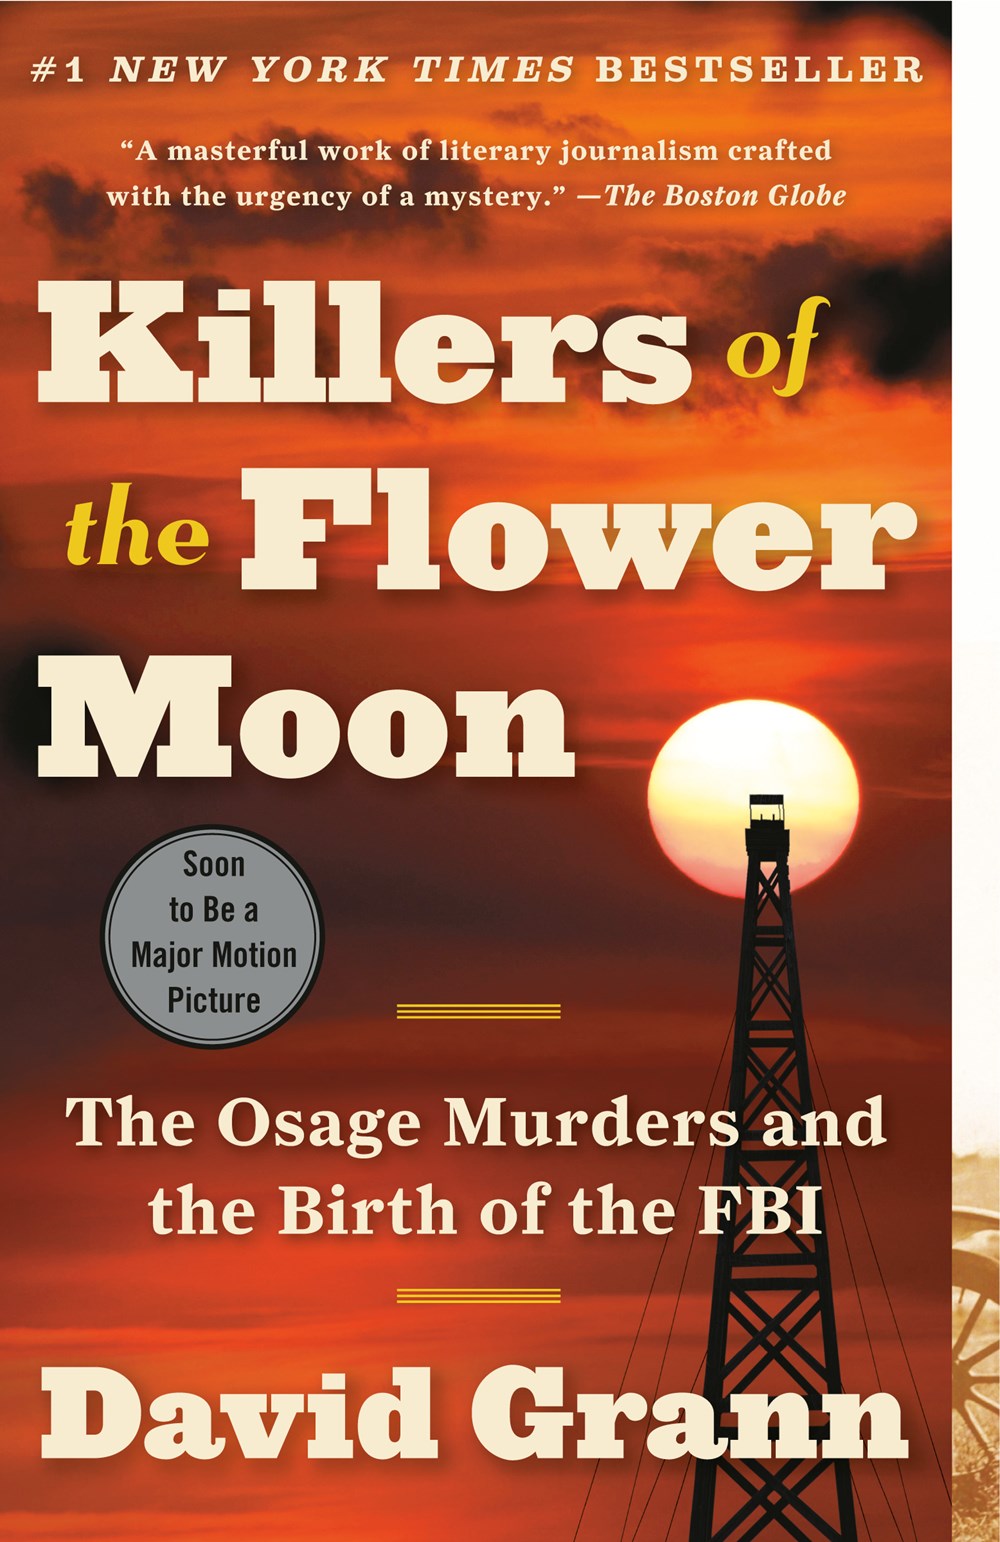 KILLERS OF FLOWER MOON: THE OSAGE MURDERS AND THE BIRTH OF THE FBI